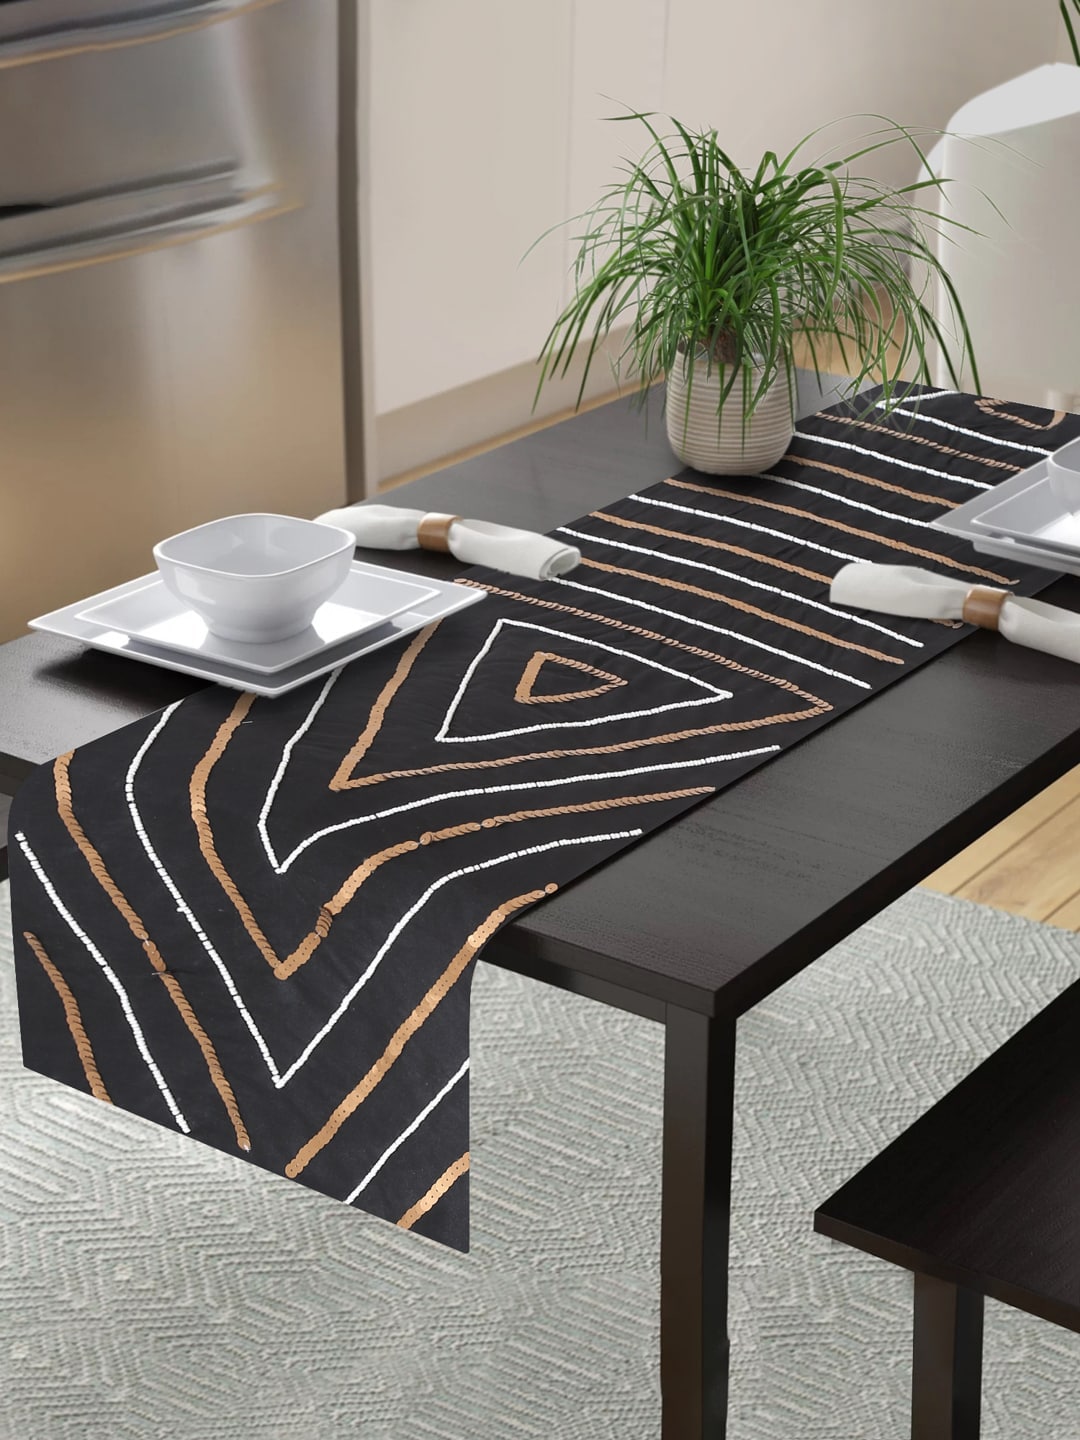 Alina decor Black & White Embellished 6-Seater Table Runner Price in India